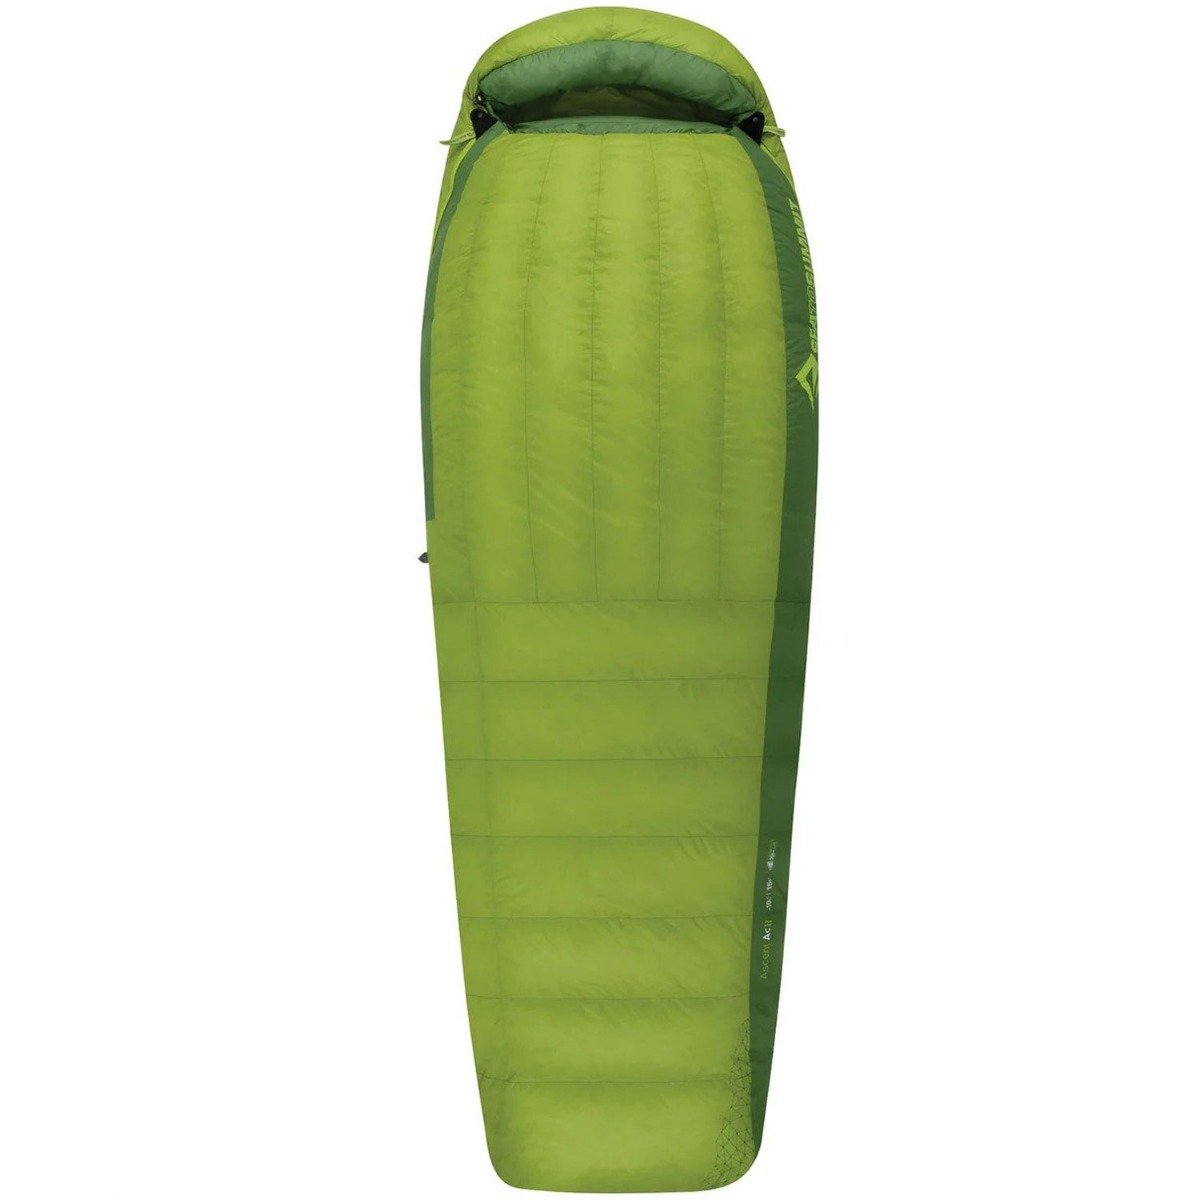 Sea to Summit Ascent 15 Degree Down Sleeping Bag